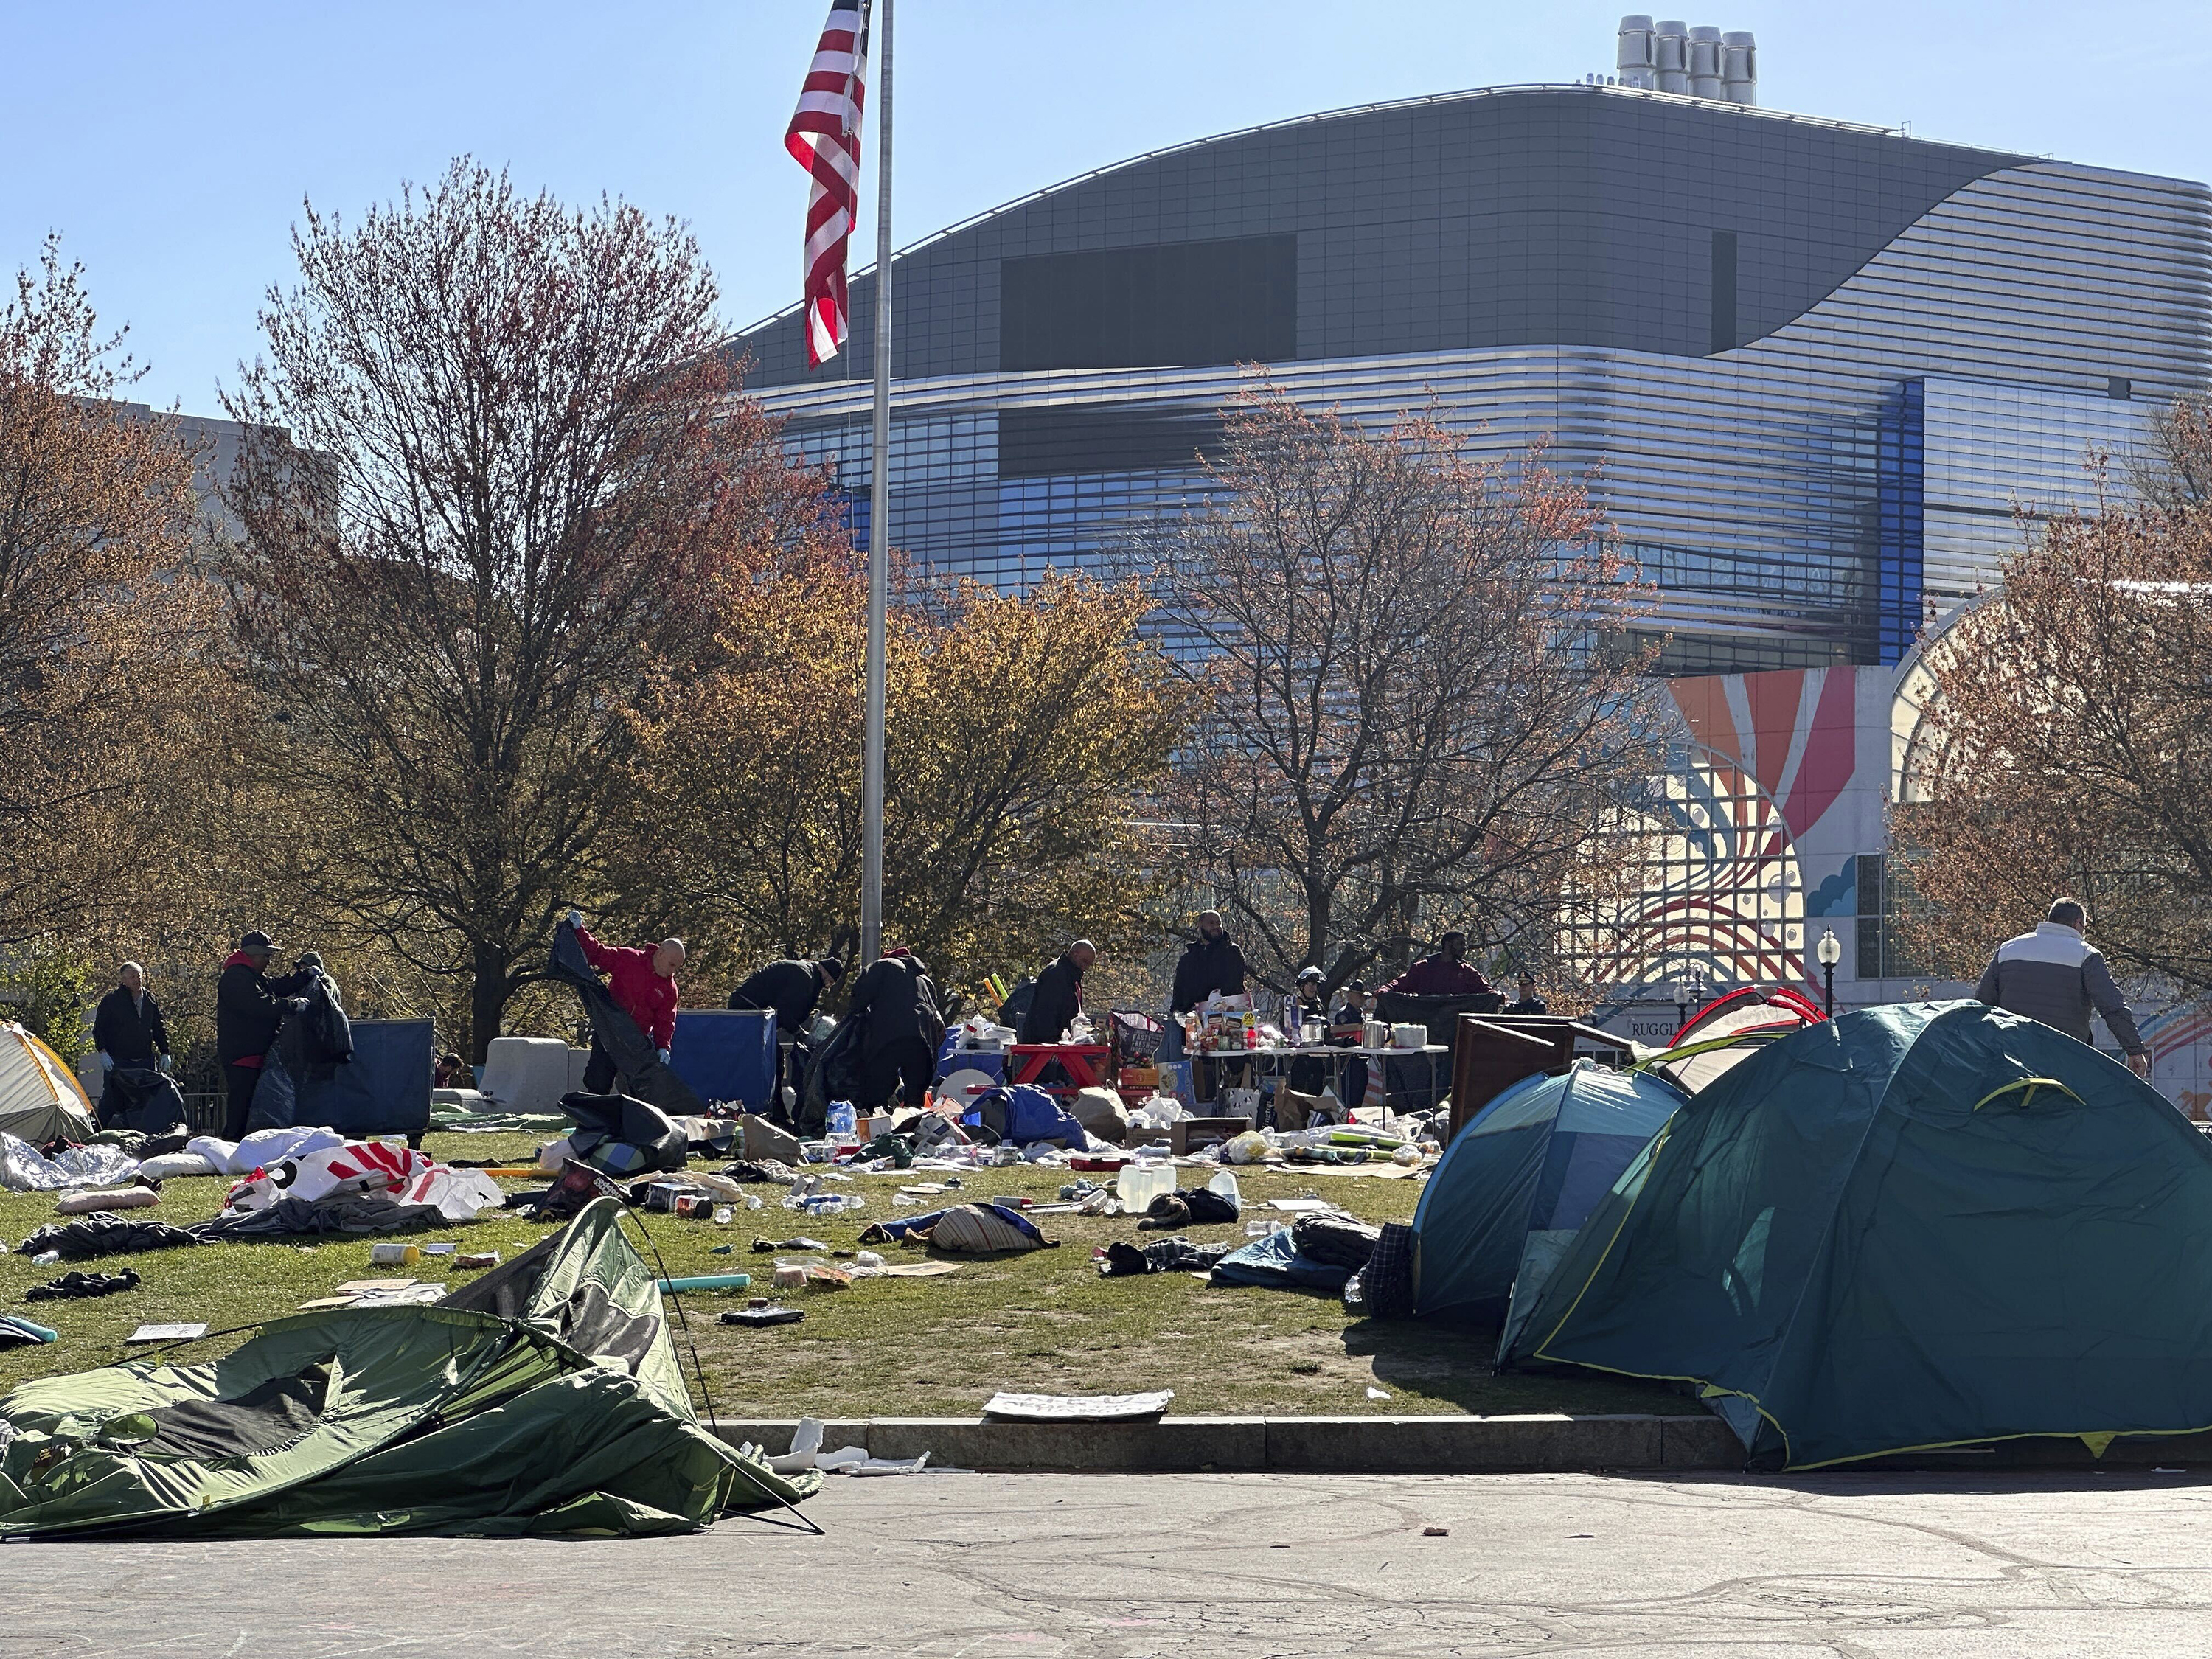 An encampment is cleared at Northeastern University in Boston on April 27.